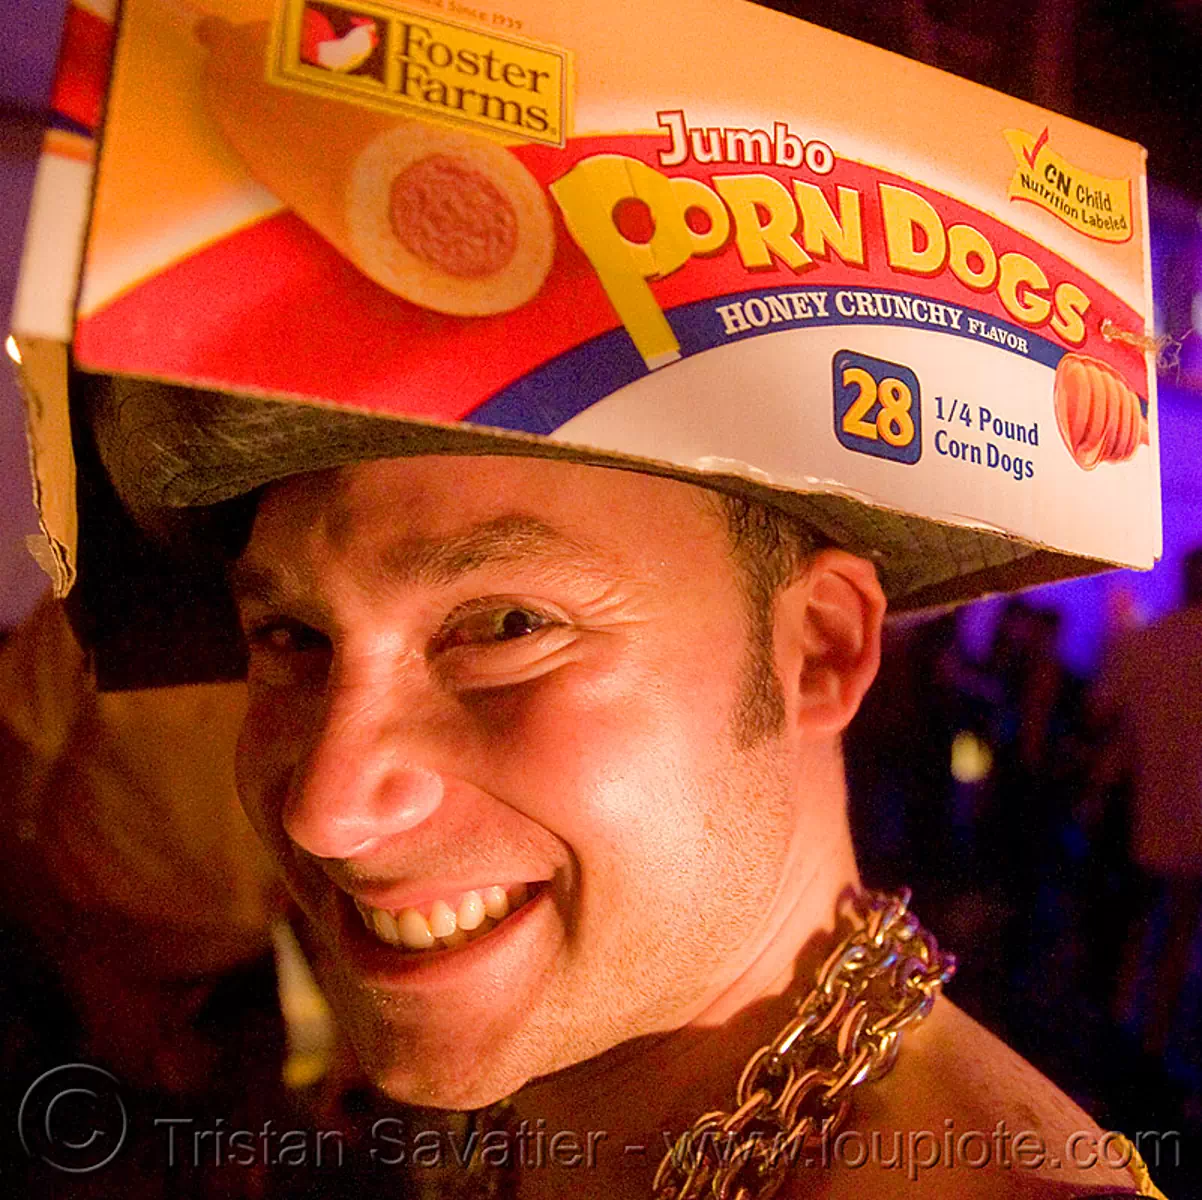 man with porn dogs hat, corn dogs, foster farms, ghostship 2008, halloween, hat, man